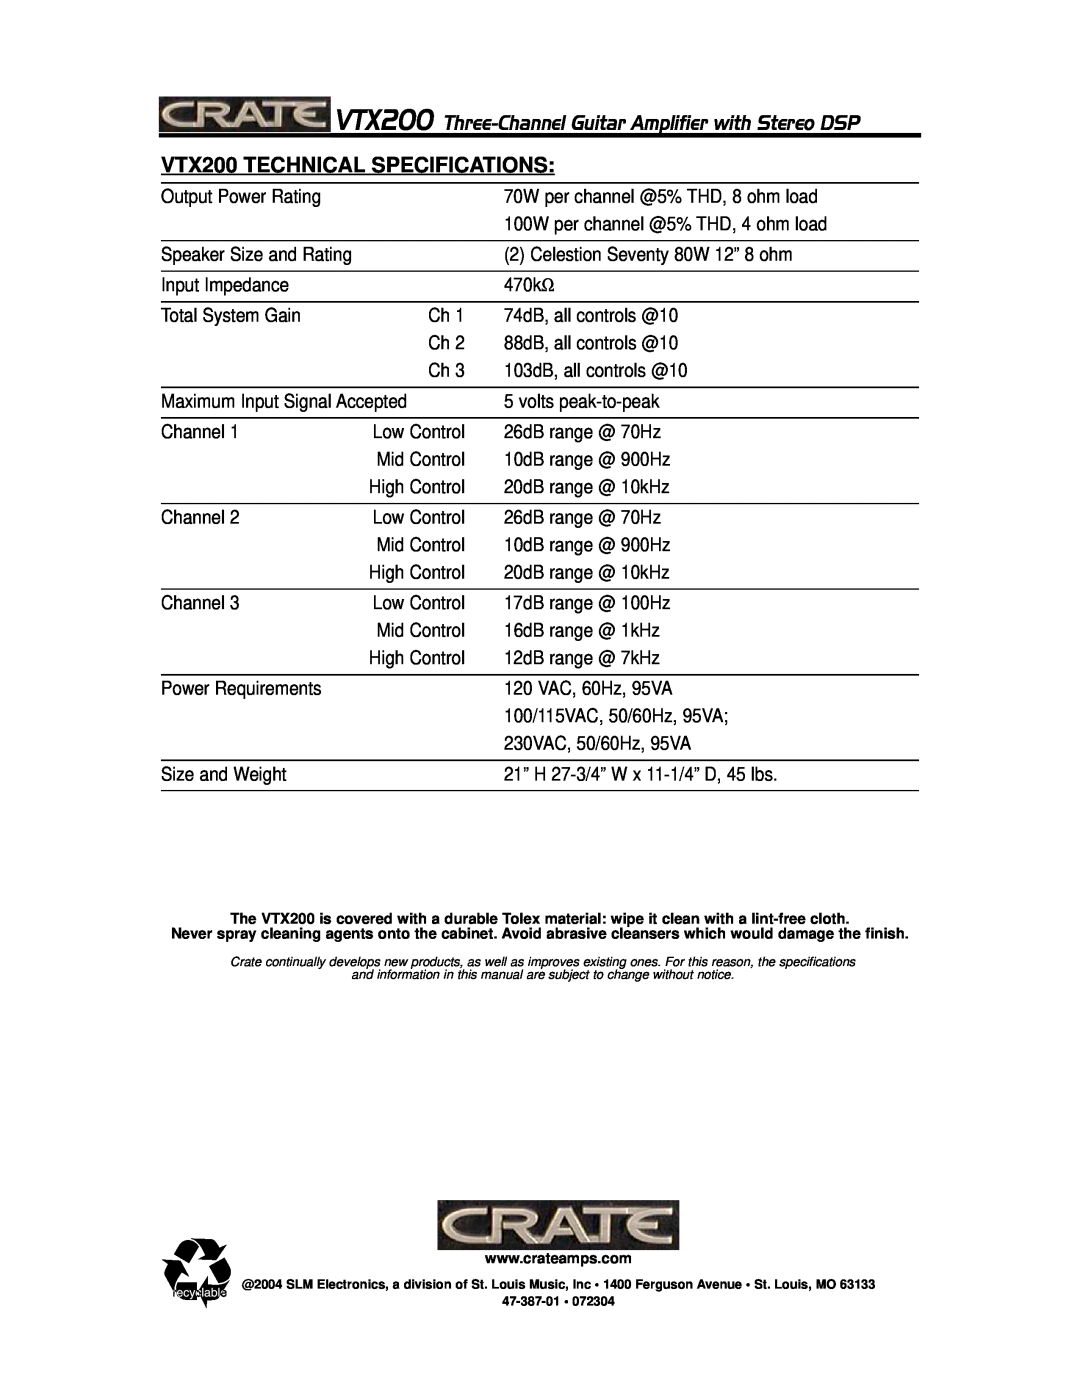 Crate Amplifiers manual VTX200 TECHNICAL SPECIFICATIONS 